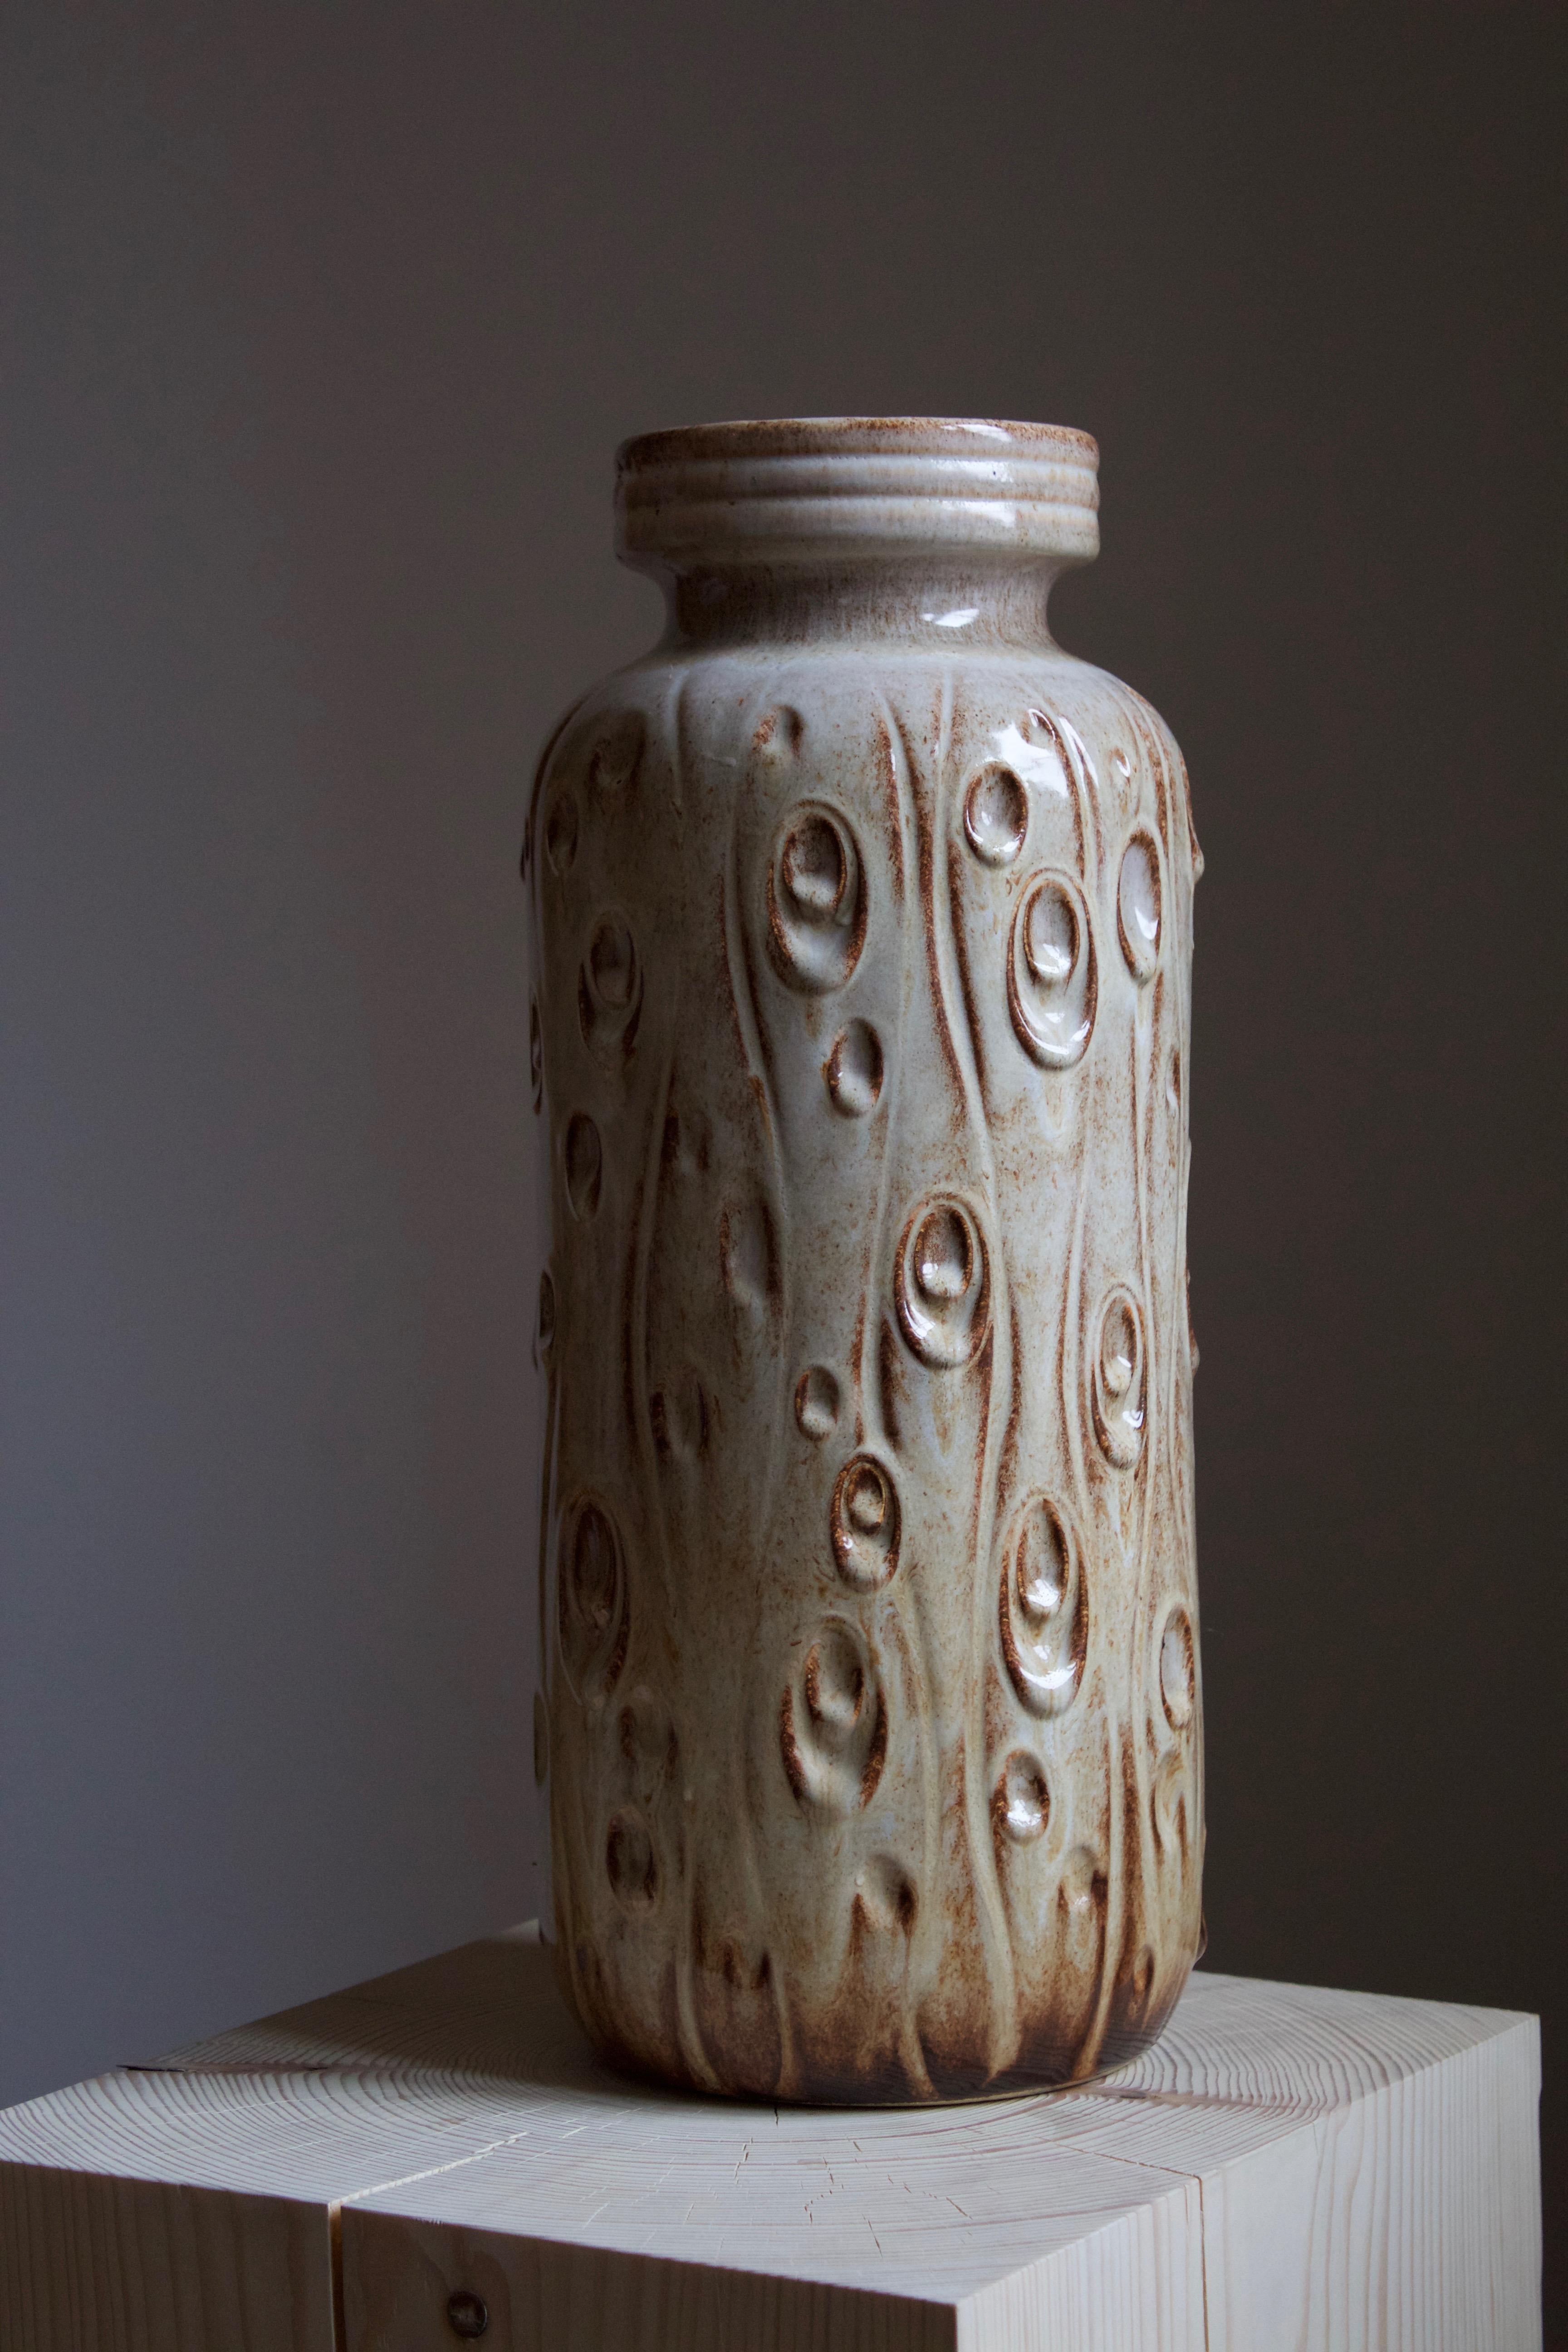 A large organic floor vase. Stamped W. Germany. 

This work is sourced in Scandinavia, where these works are commonly found. 

Other designers of the period include Axel Salto, Arne Bang, Carl-Harry Stålhane, Stig Lindberg, and Wilhelm Kåge.